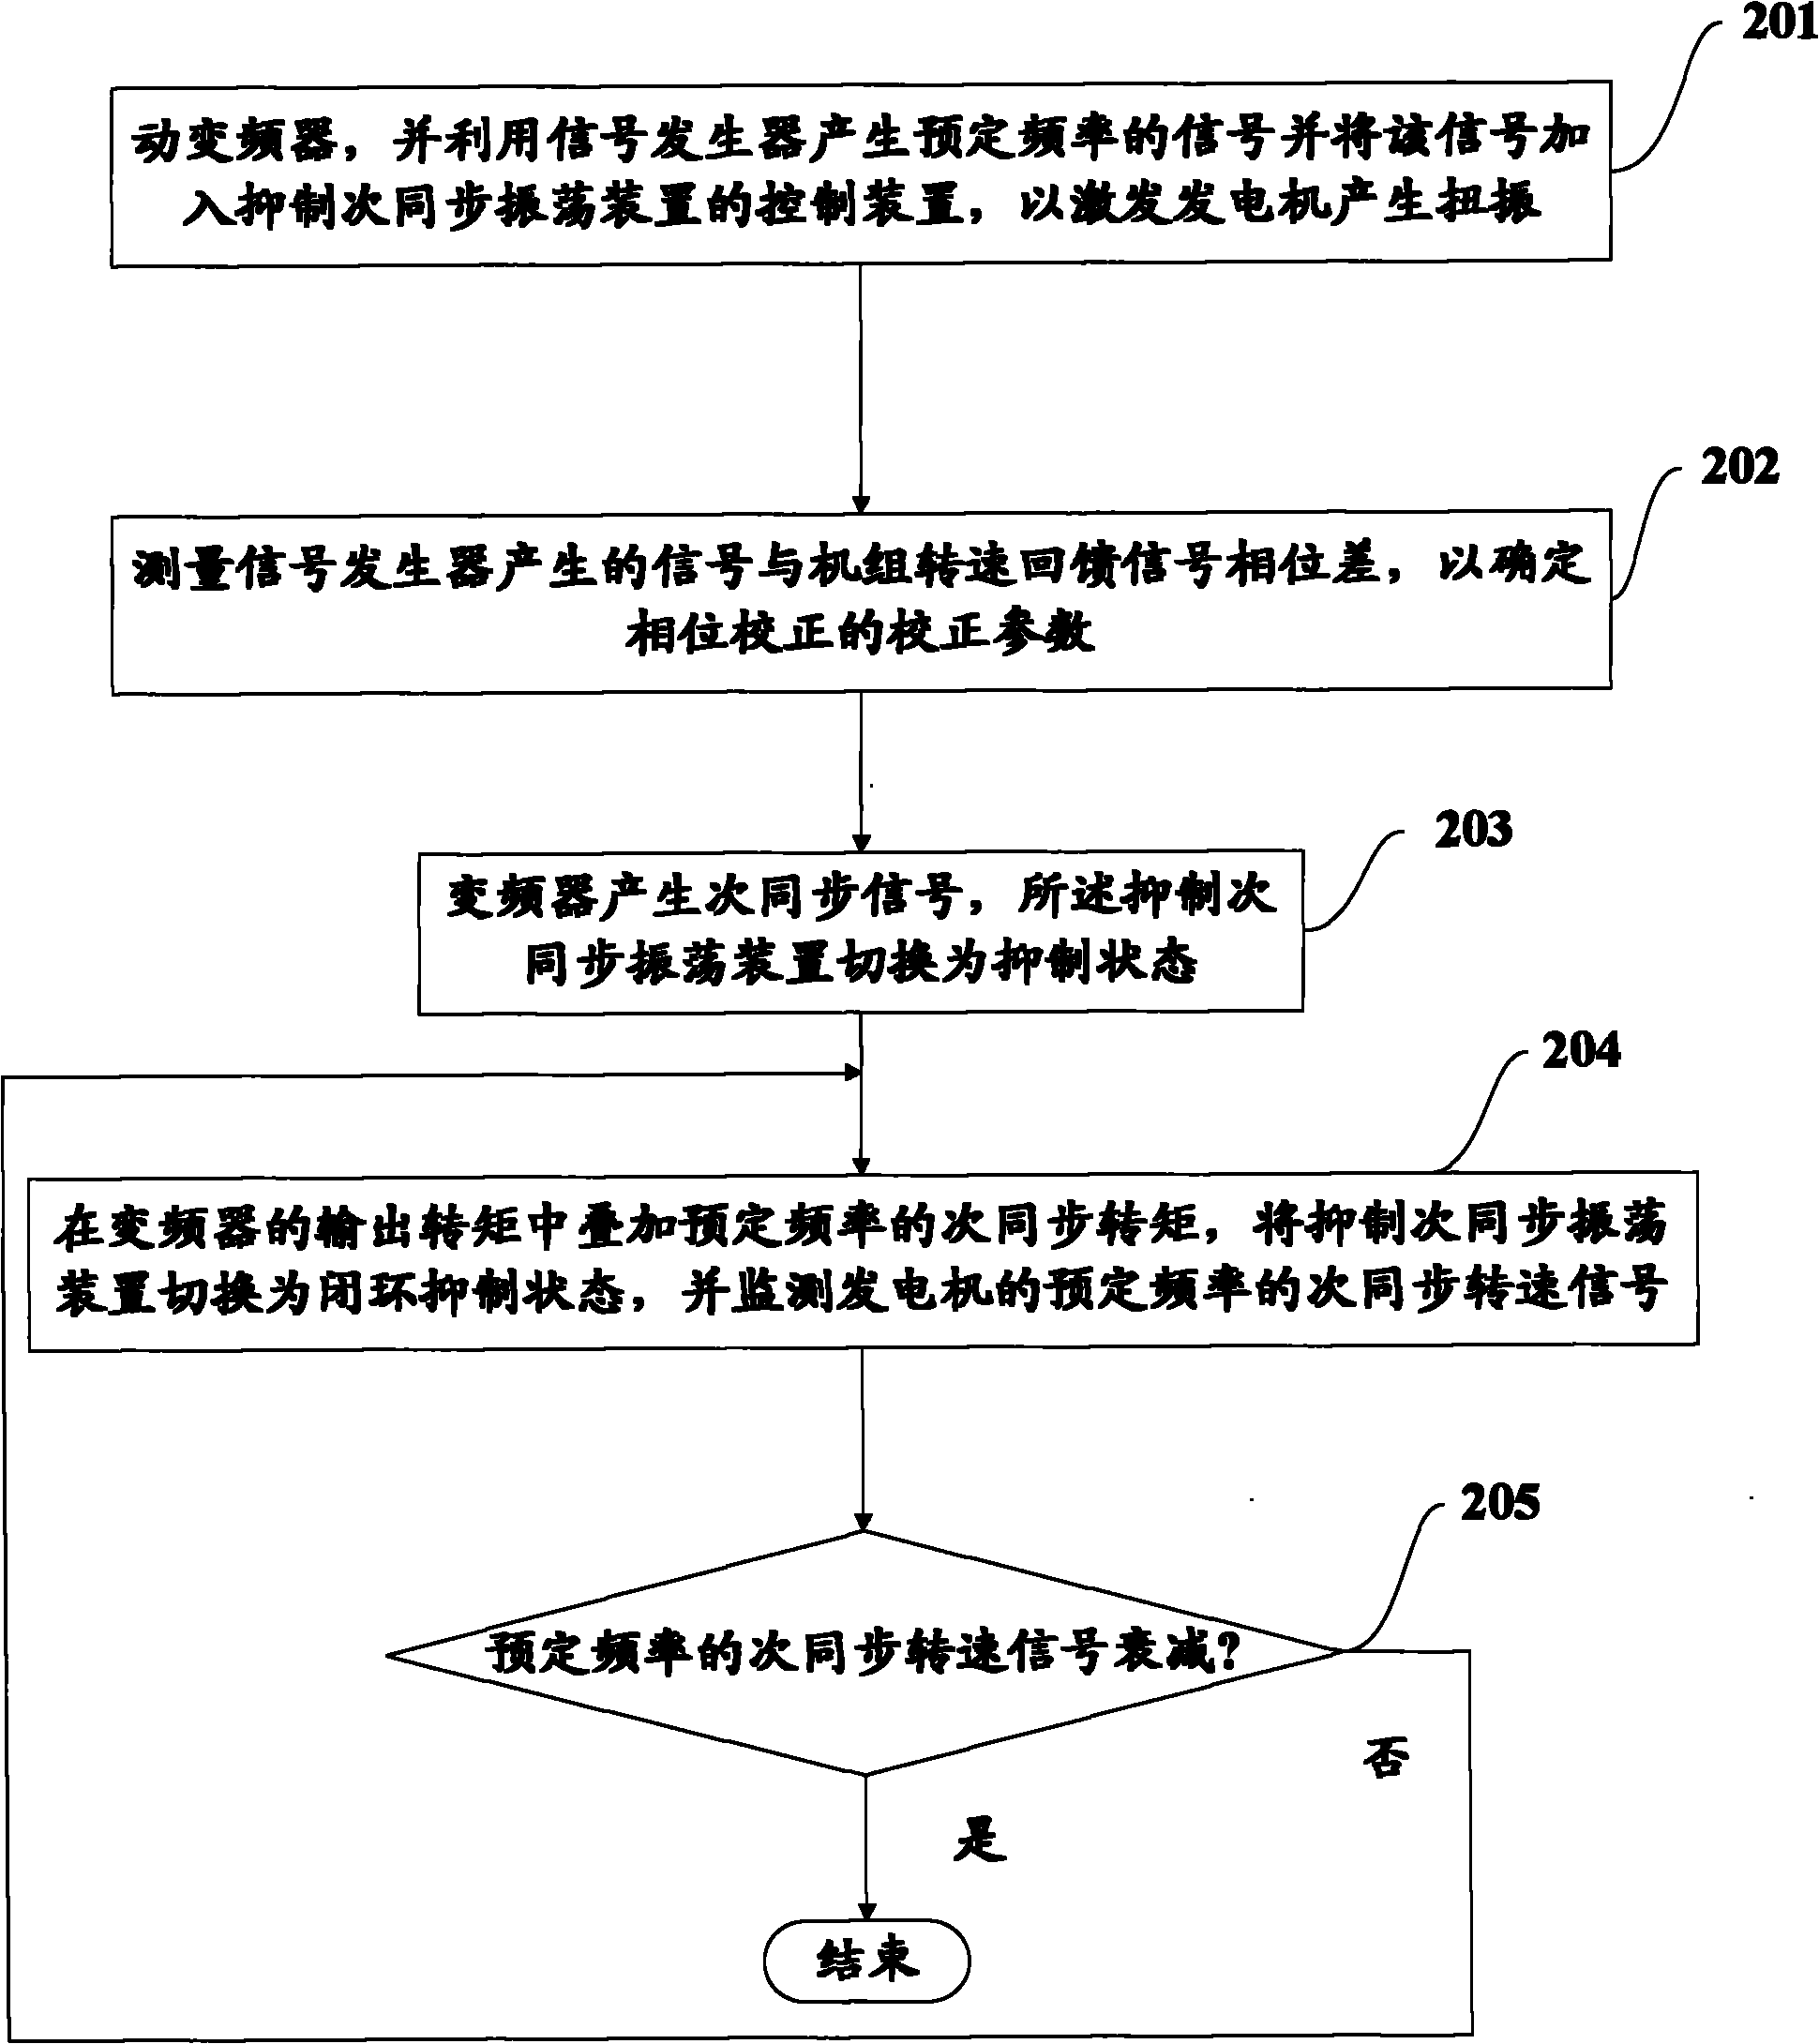 Moving die test method by use of restraint subsynchronous resonance (SSR) device